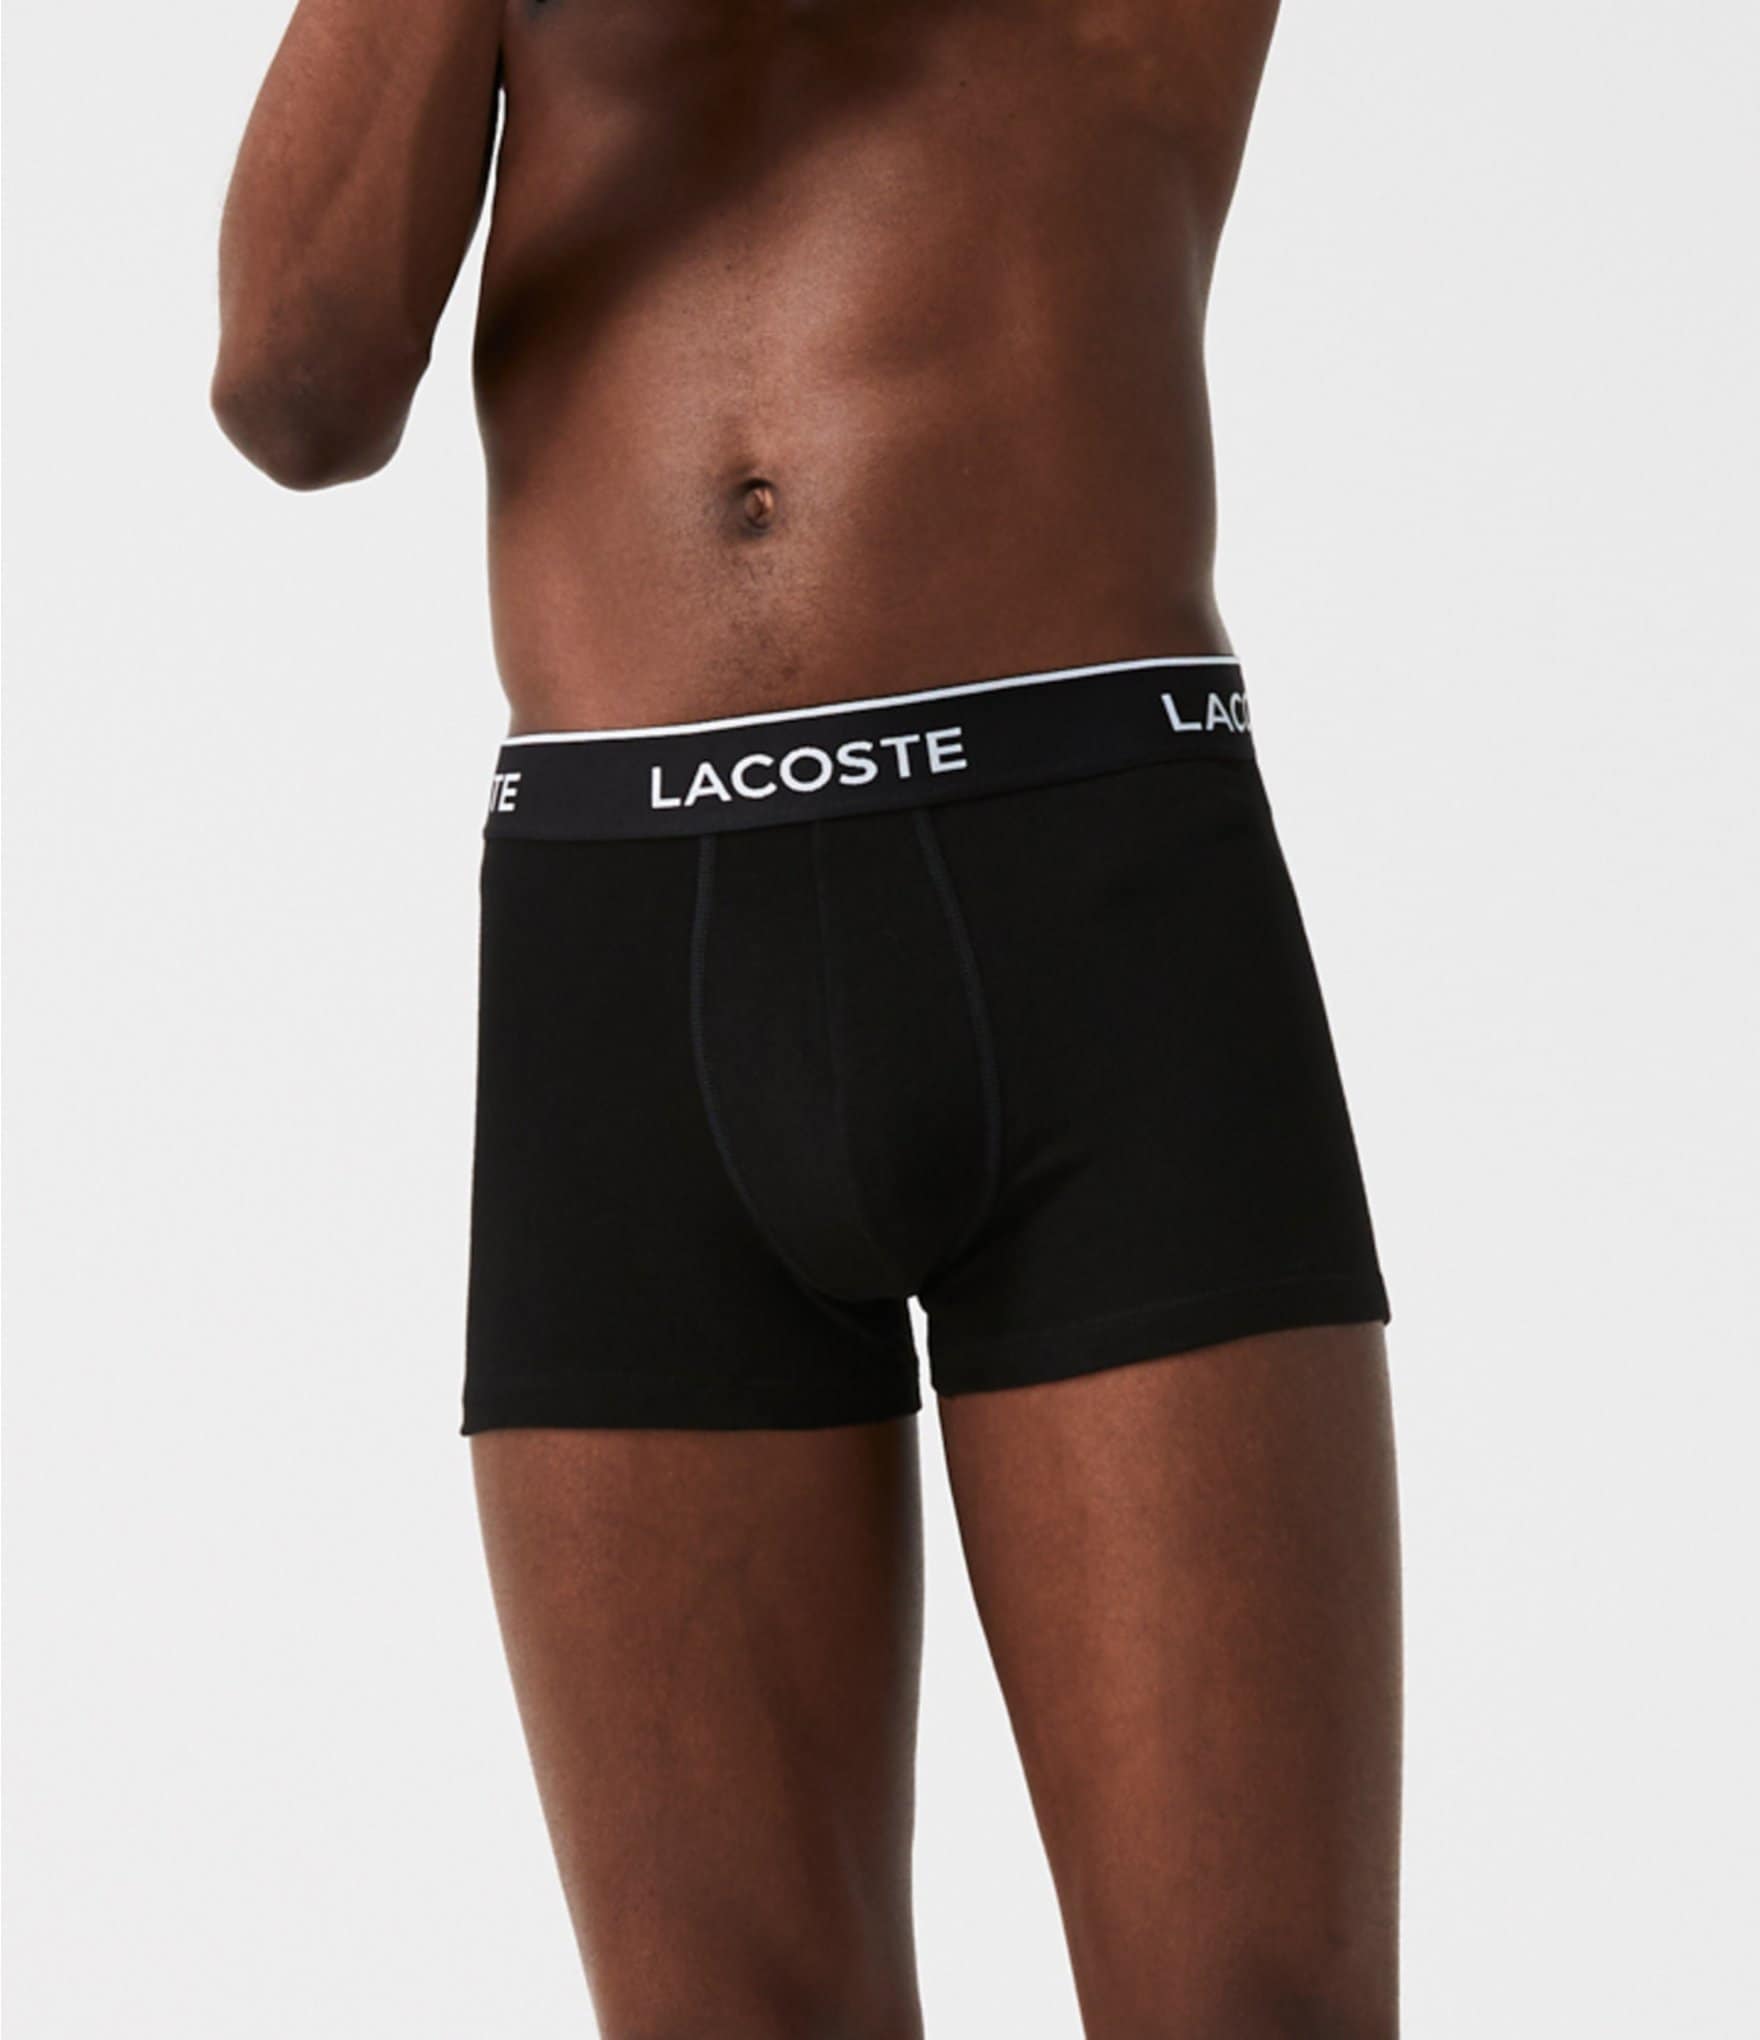 Lacoste Men's Casual All Over Croc 3 Pack Cotton Stretch Trunks